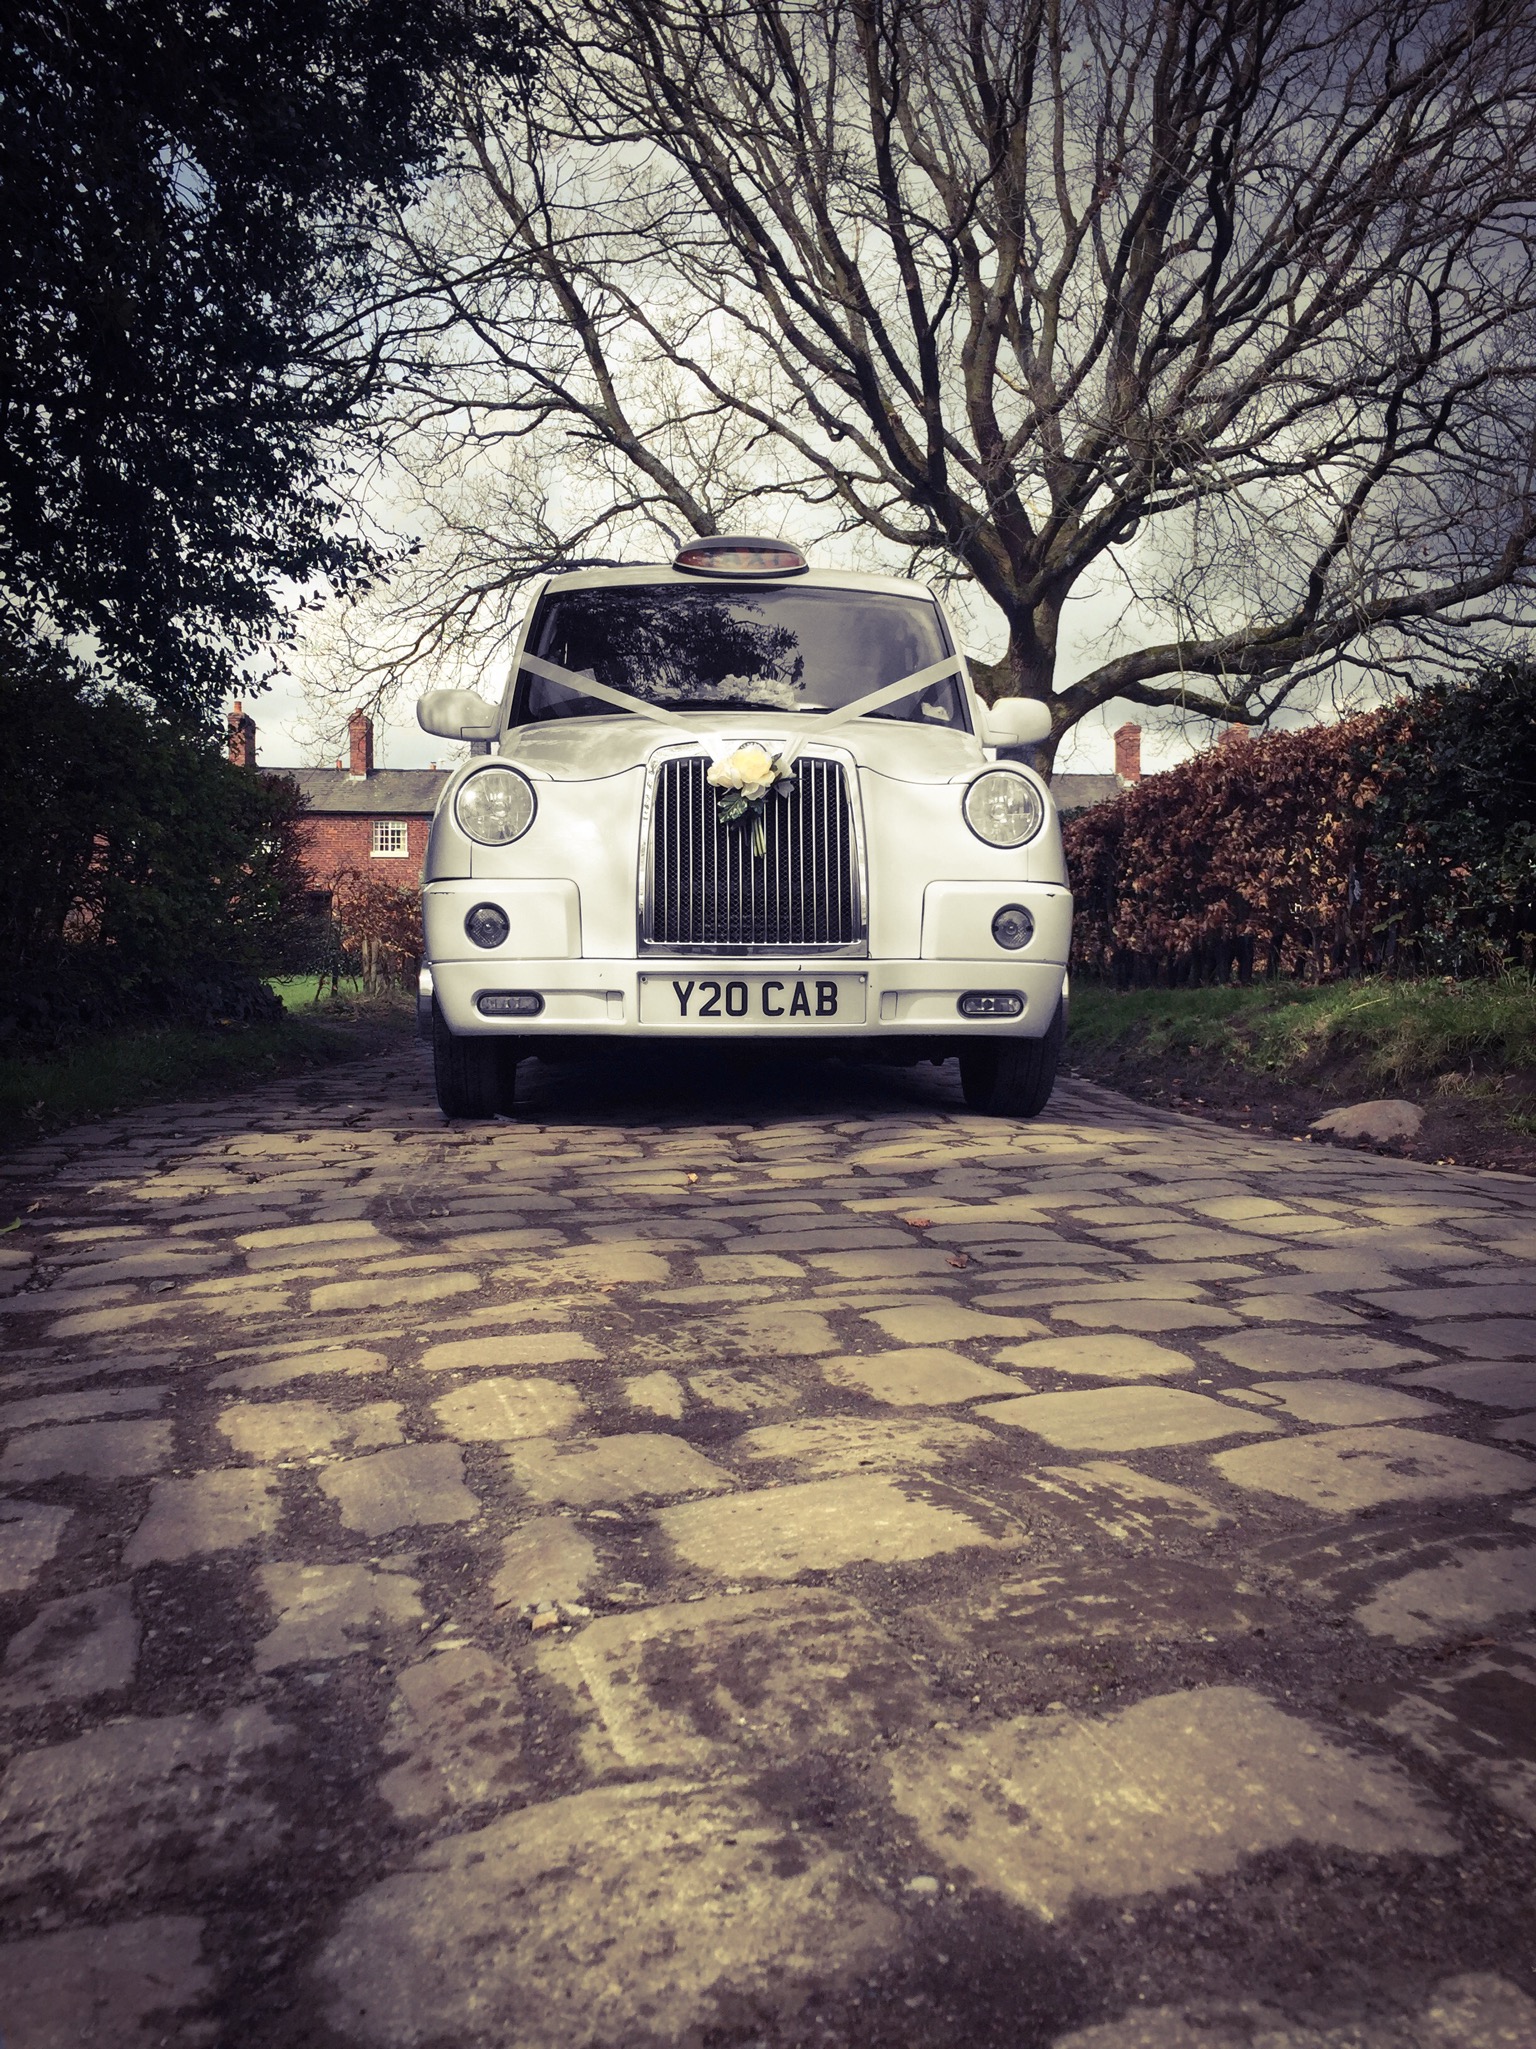 Norcliffe style wedding taxi